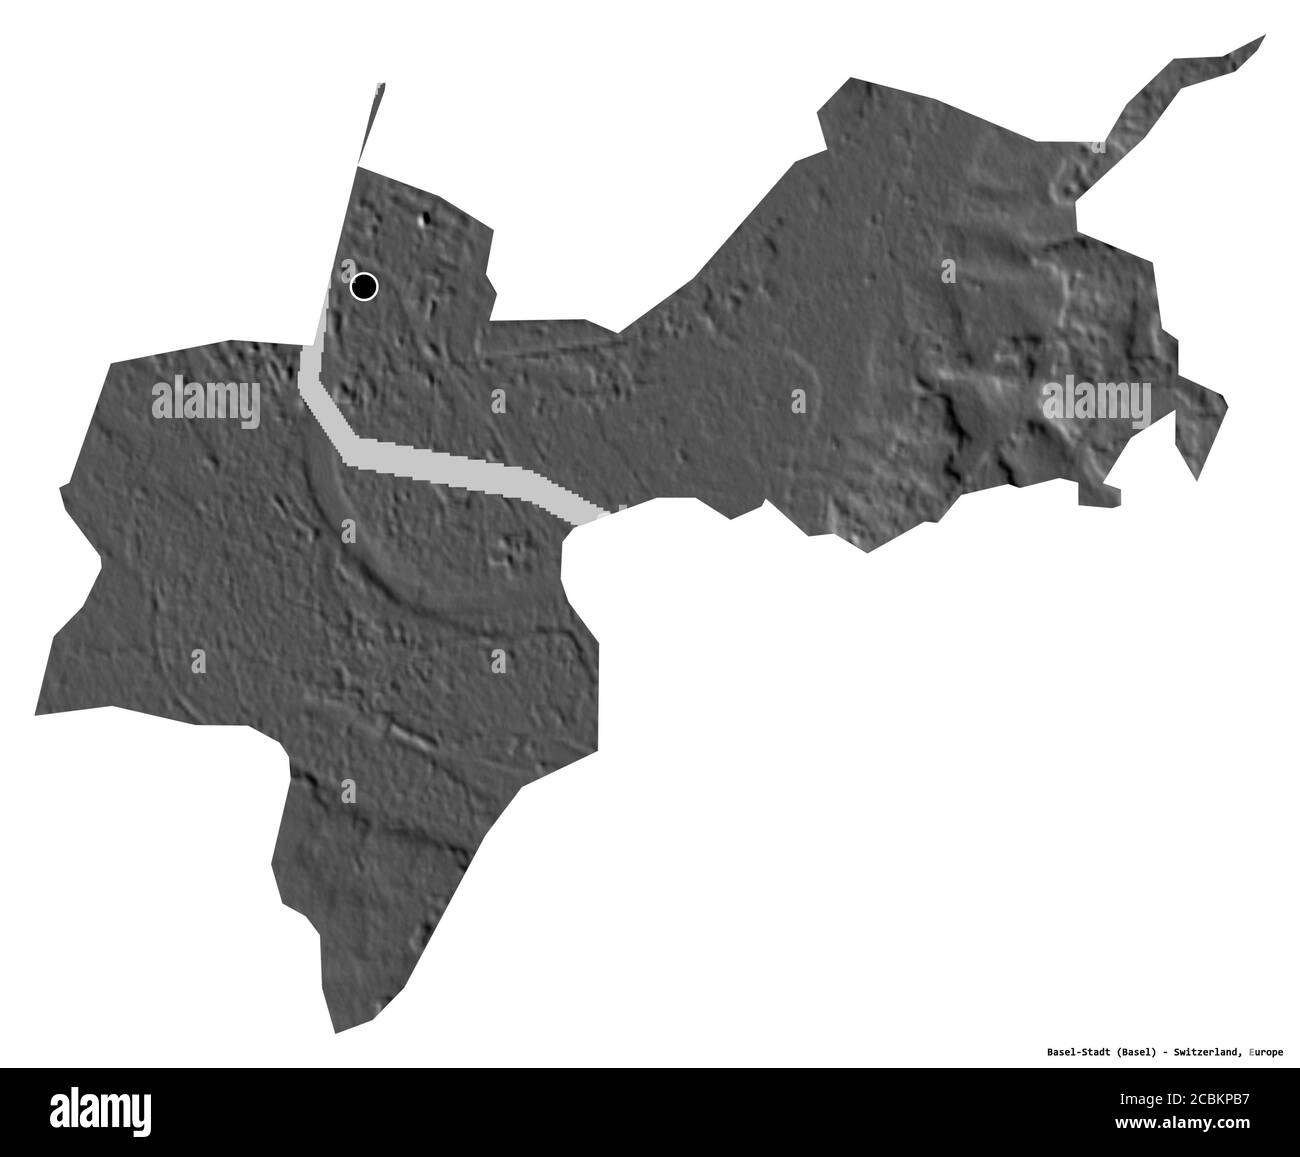 Shape of Basel-Stadt, canton of Switzerland, with its capital isolated on white background. Bilevel elevation map. 3D rendering Stock Photo